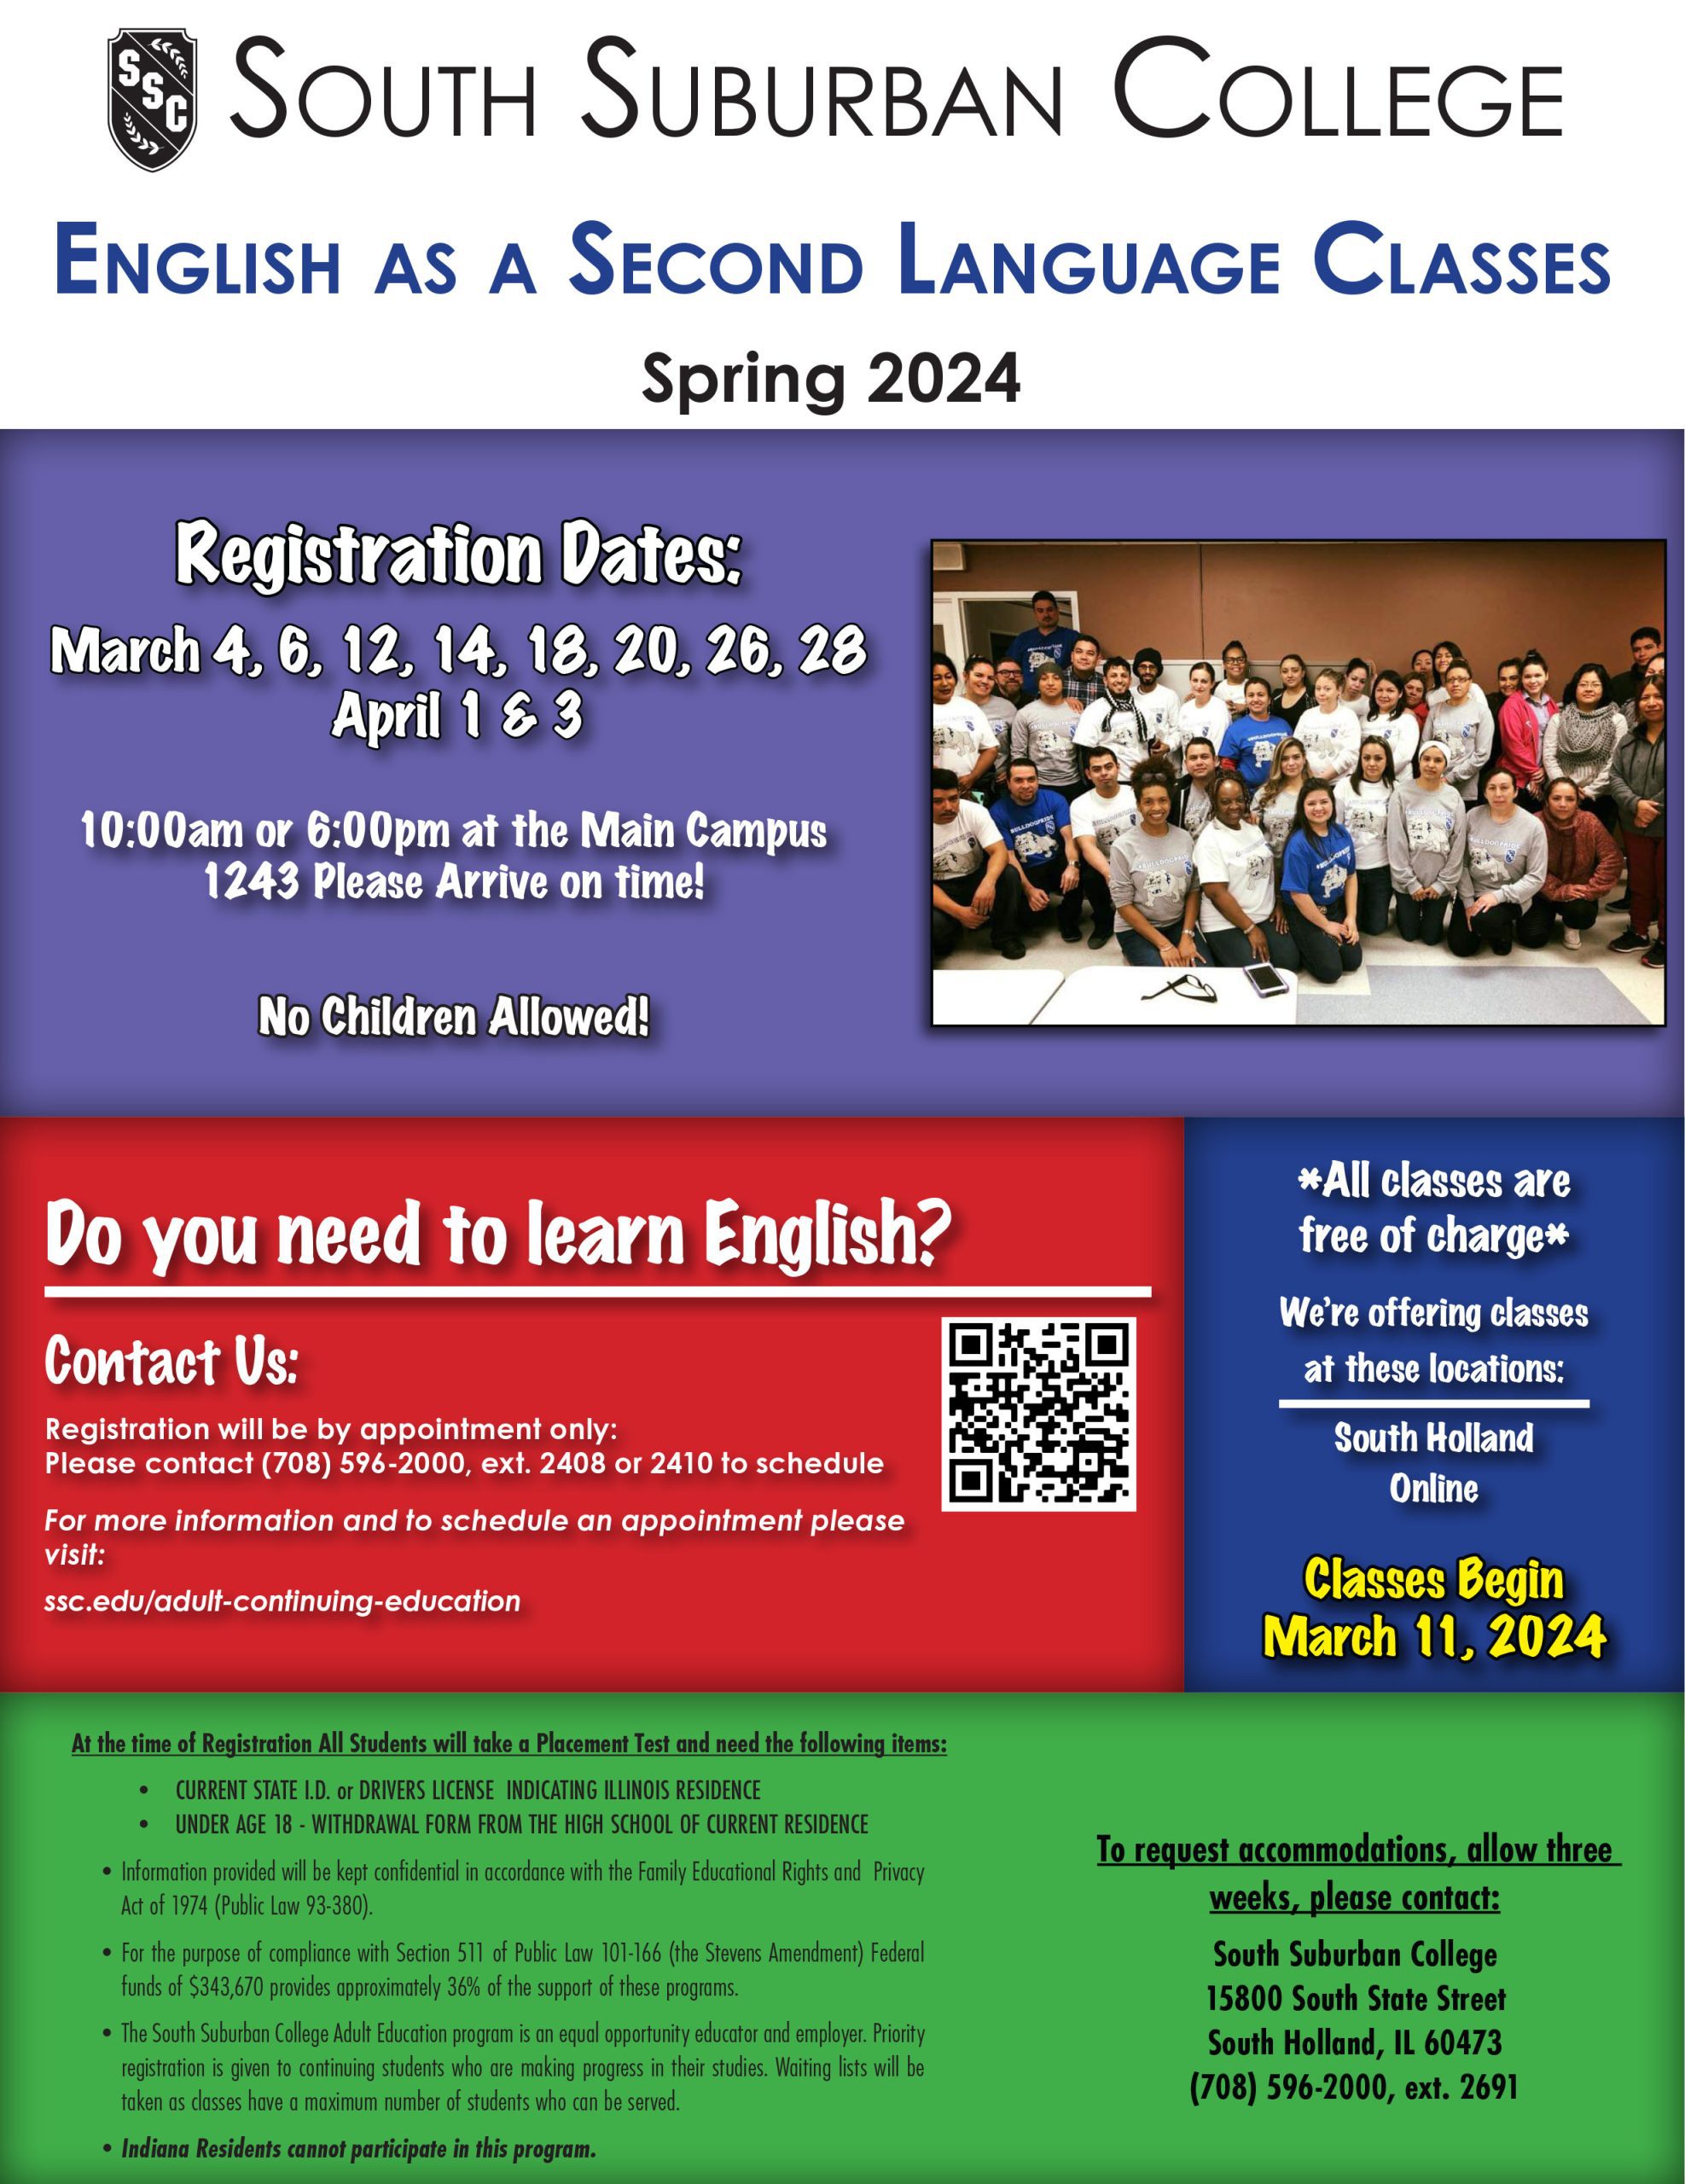 Image of the English as a Second Language Flyer for Spring 2024